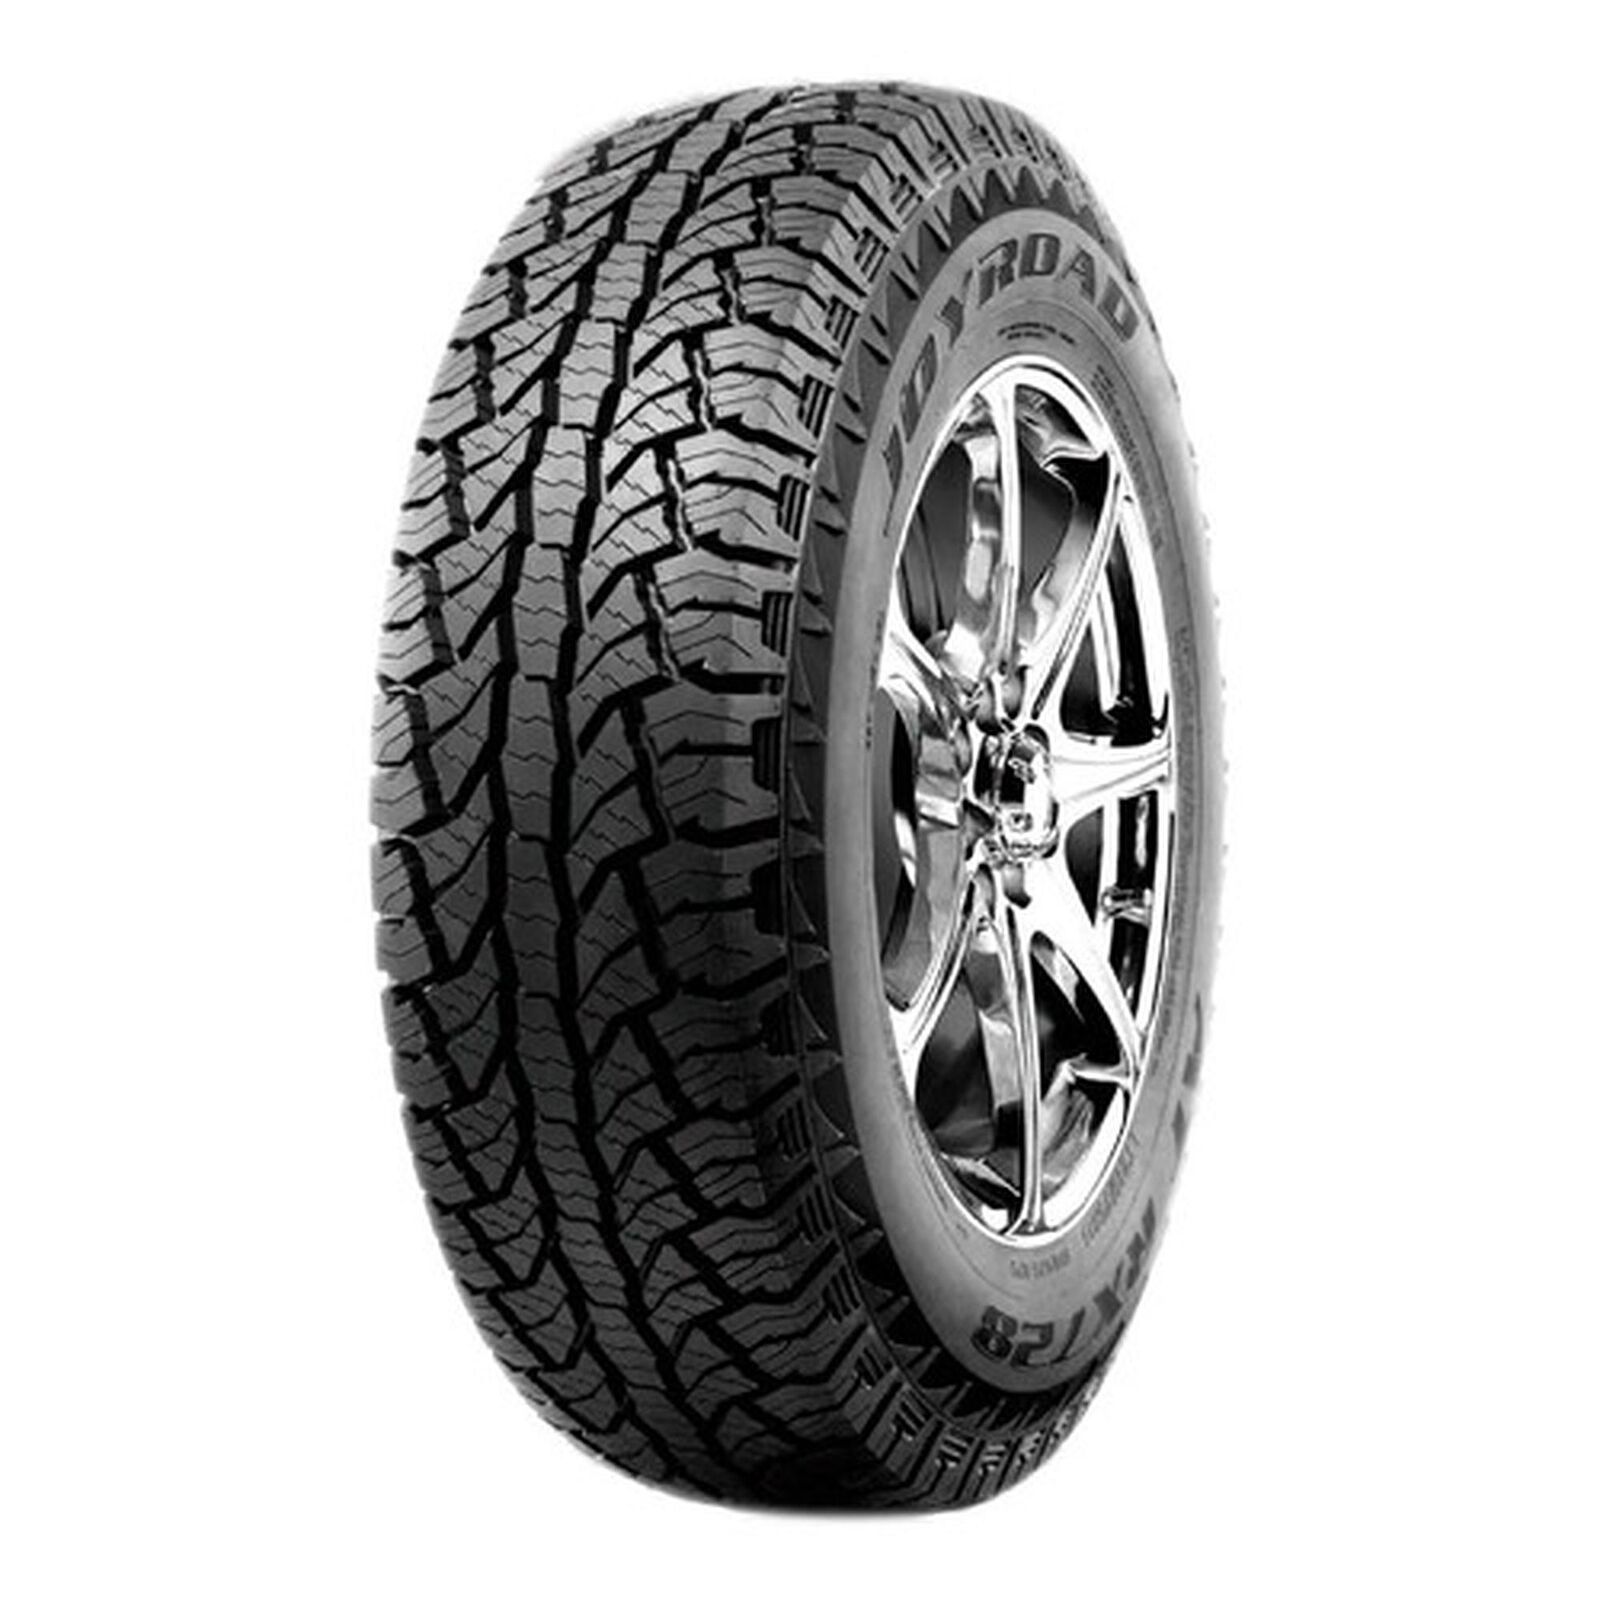 4 New Ardent Adventure A/t  - 225x65r17 Tires 2256517 225 65 17